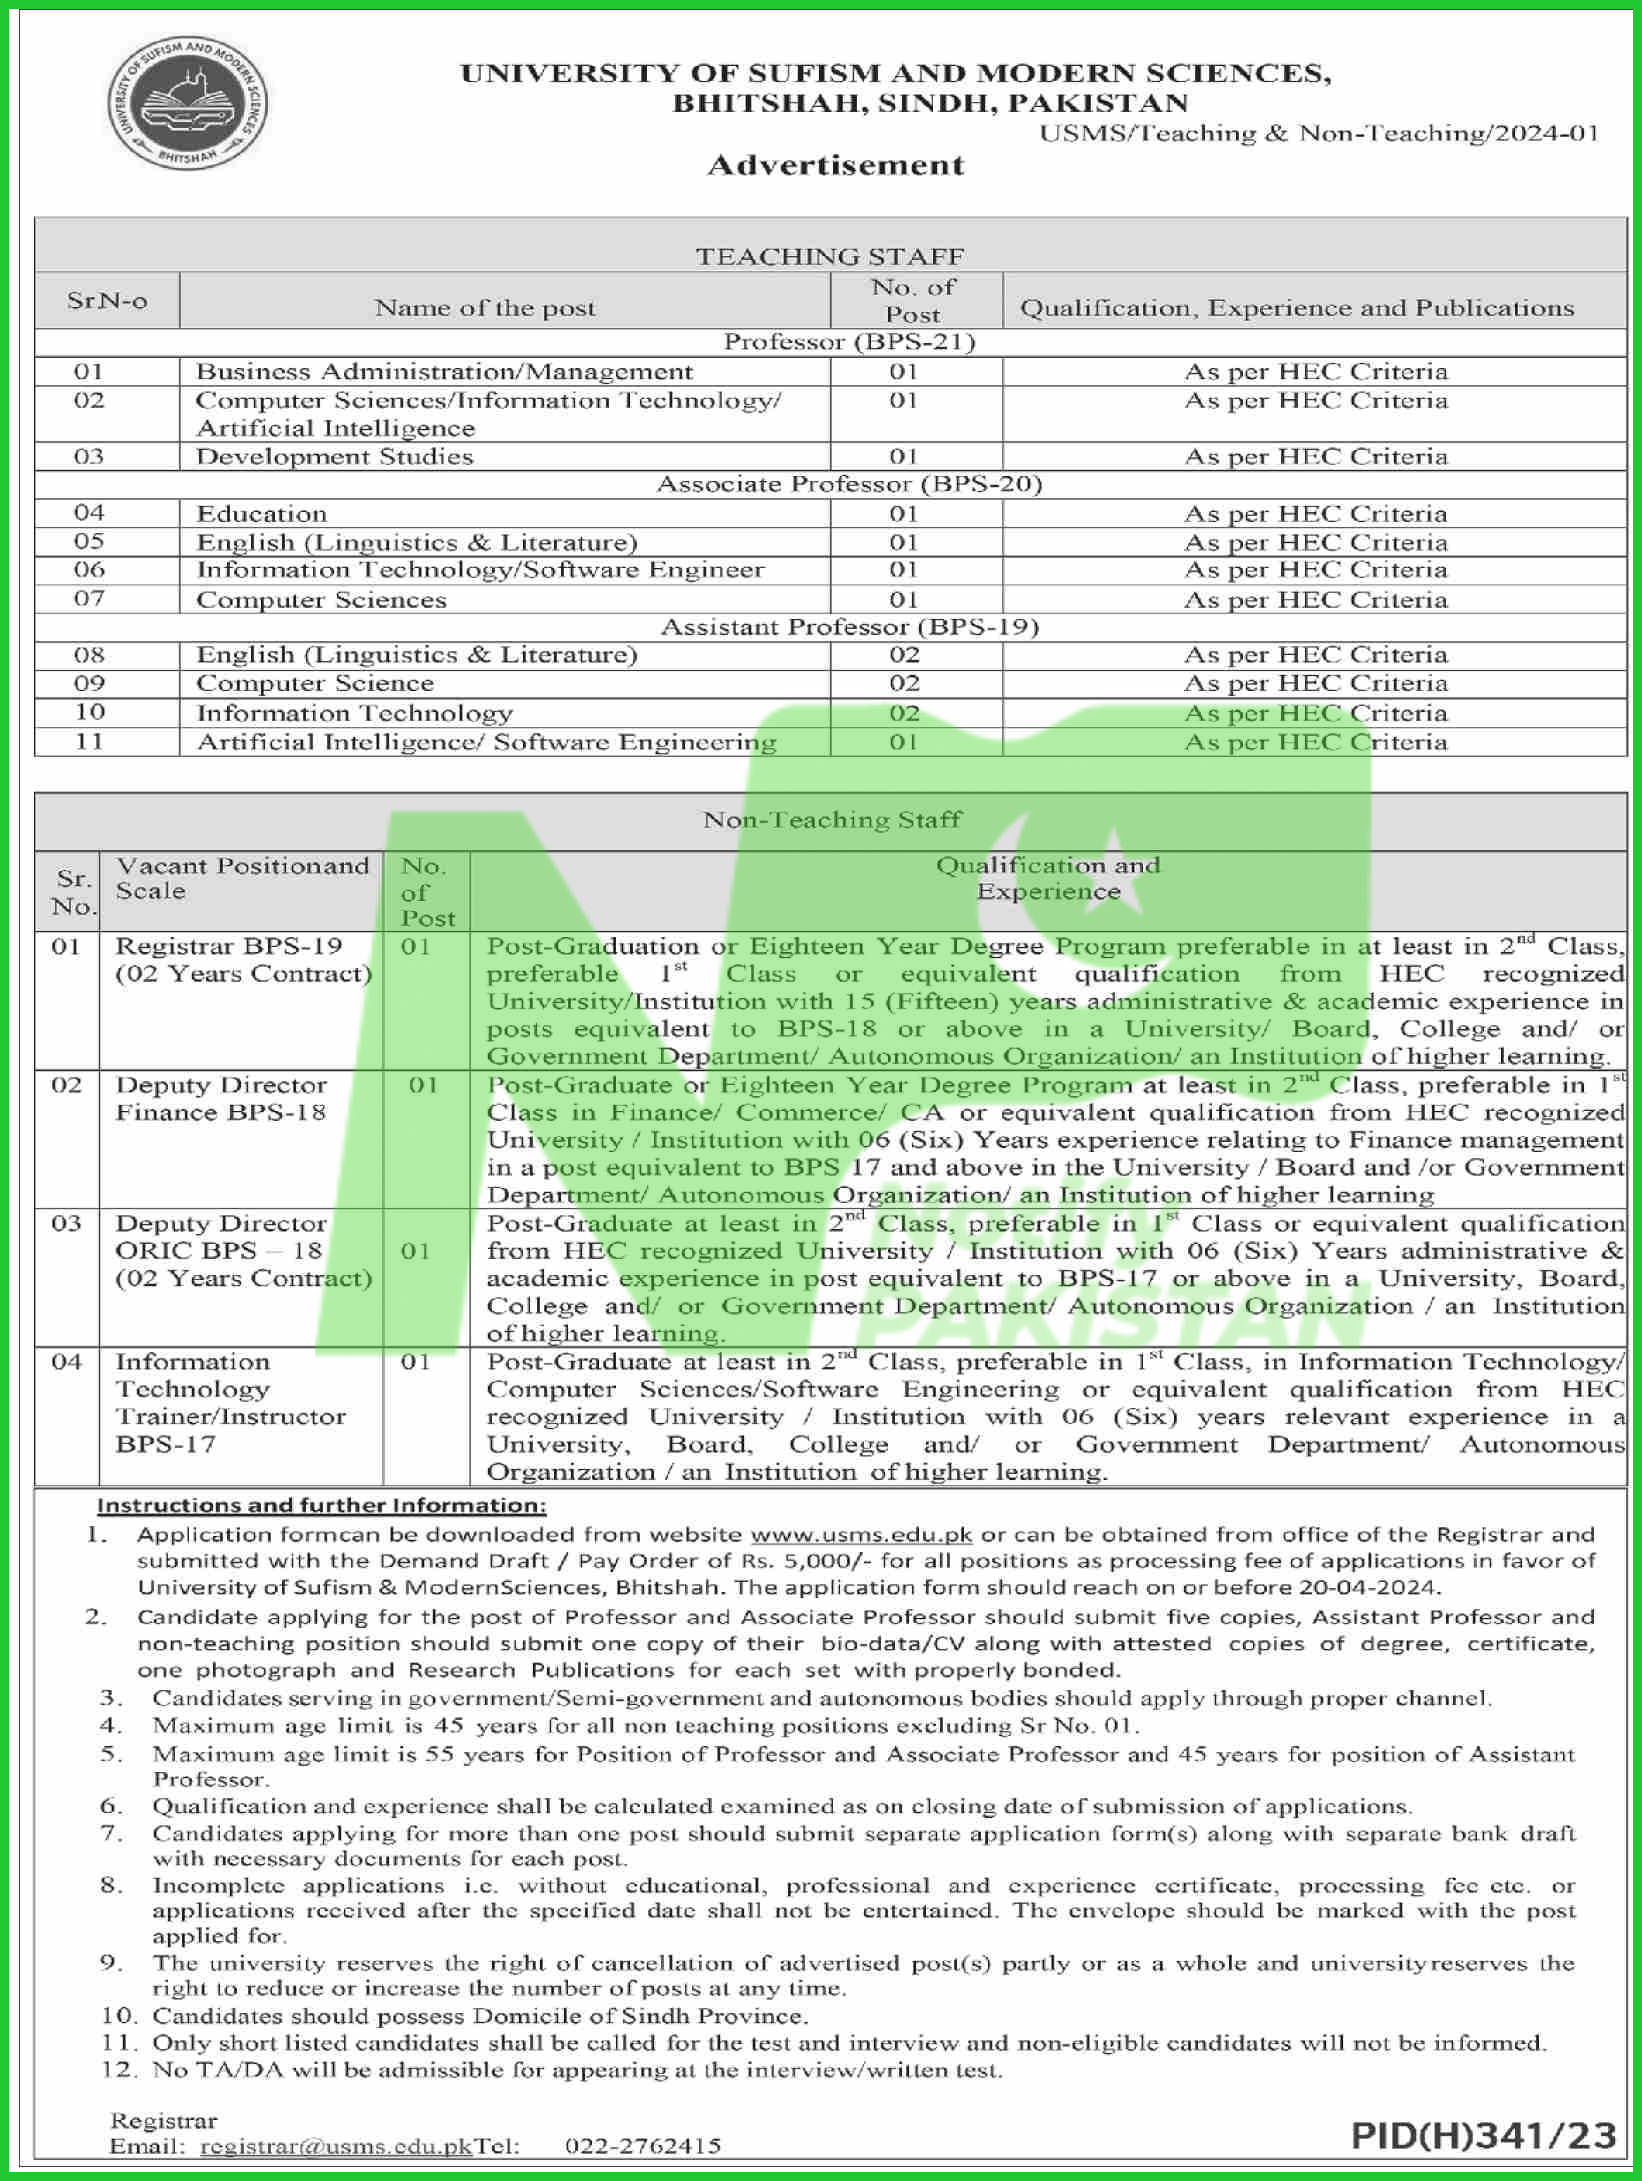 University of Sufism and Modern Sciences USMS Jobs 2024 Advertisement